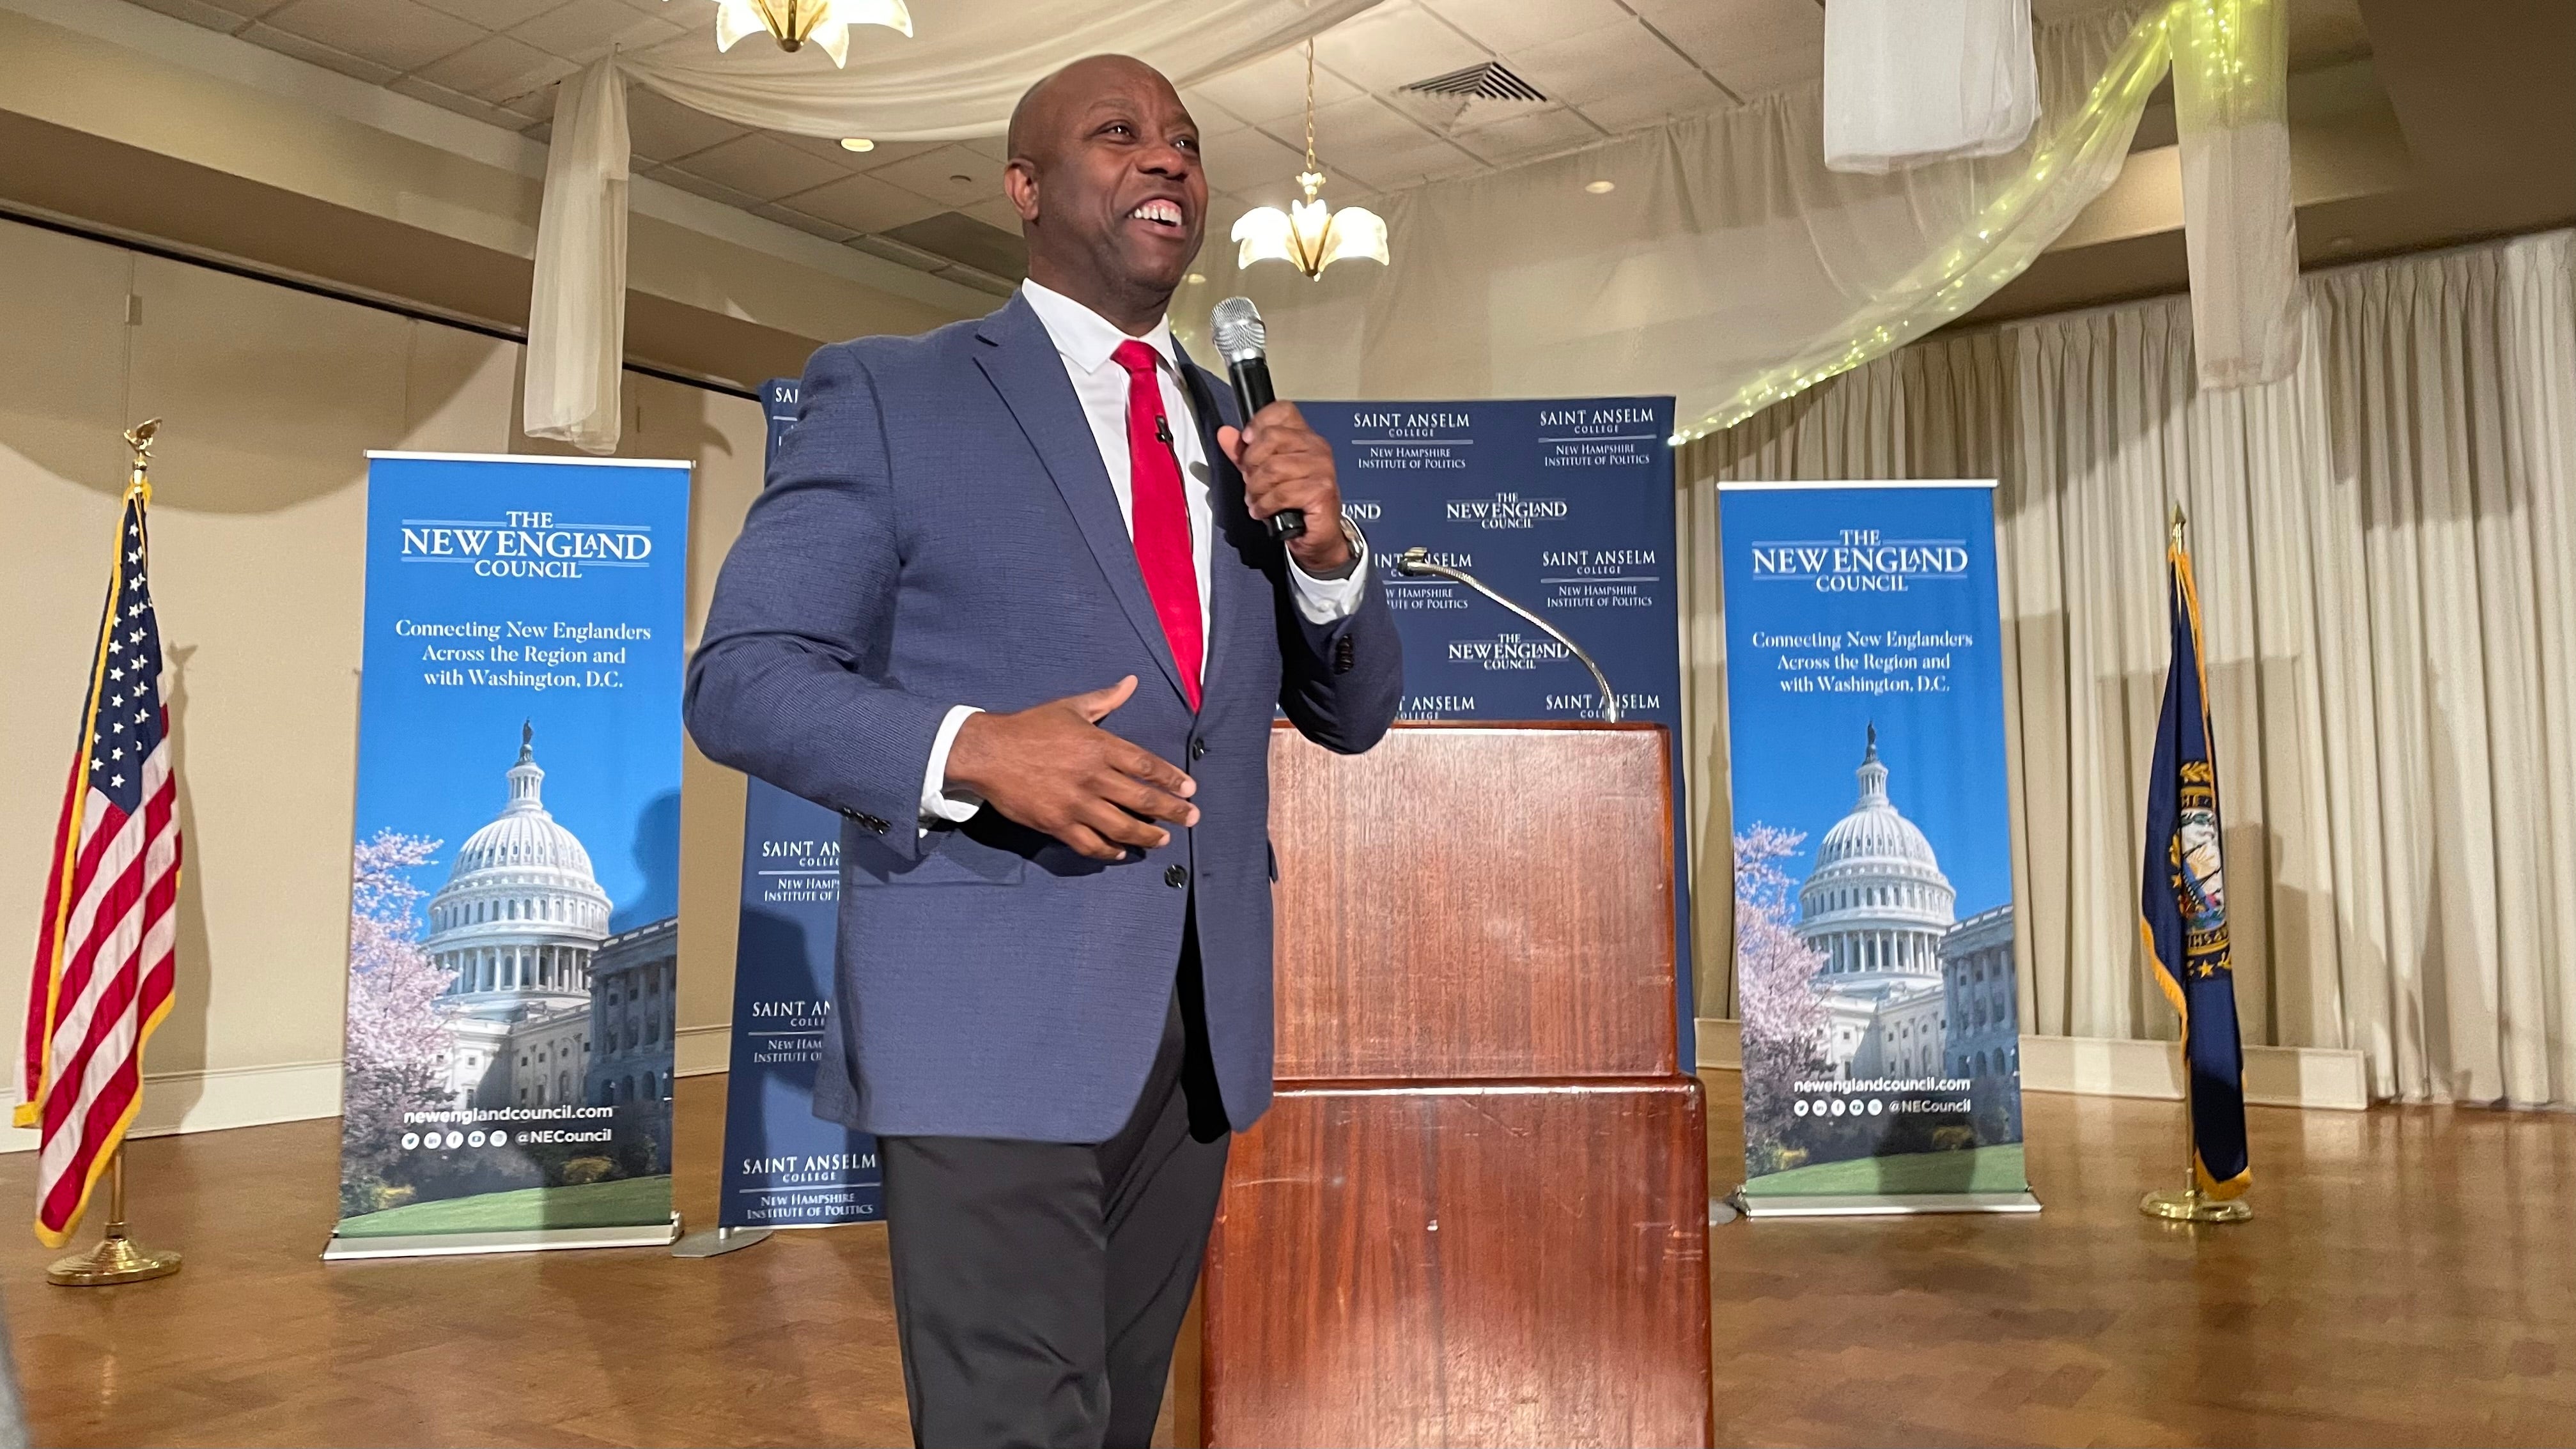 Tim Scott slams Trump, other GOP presidential candidates for being 'wrong' on abortion